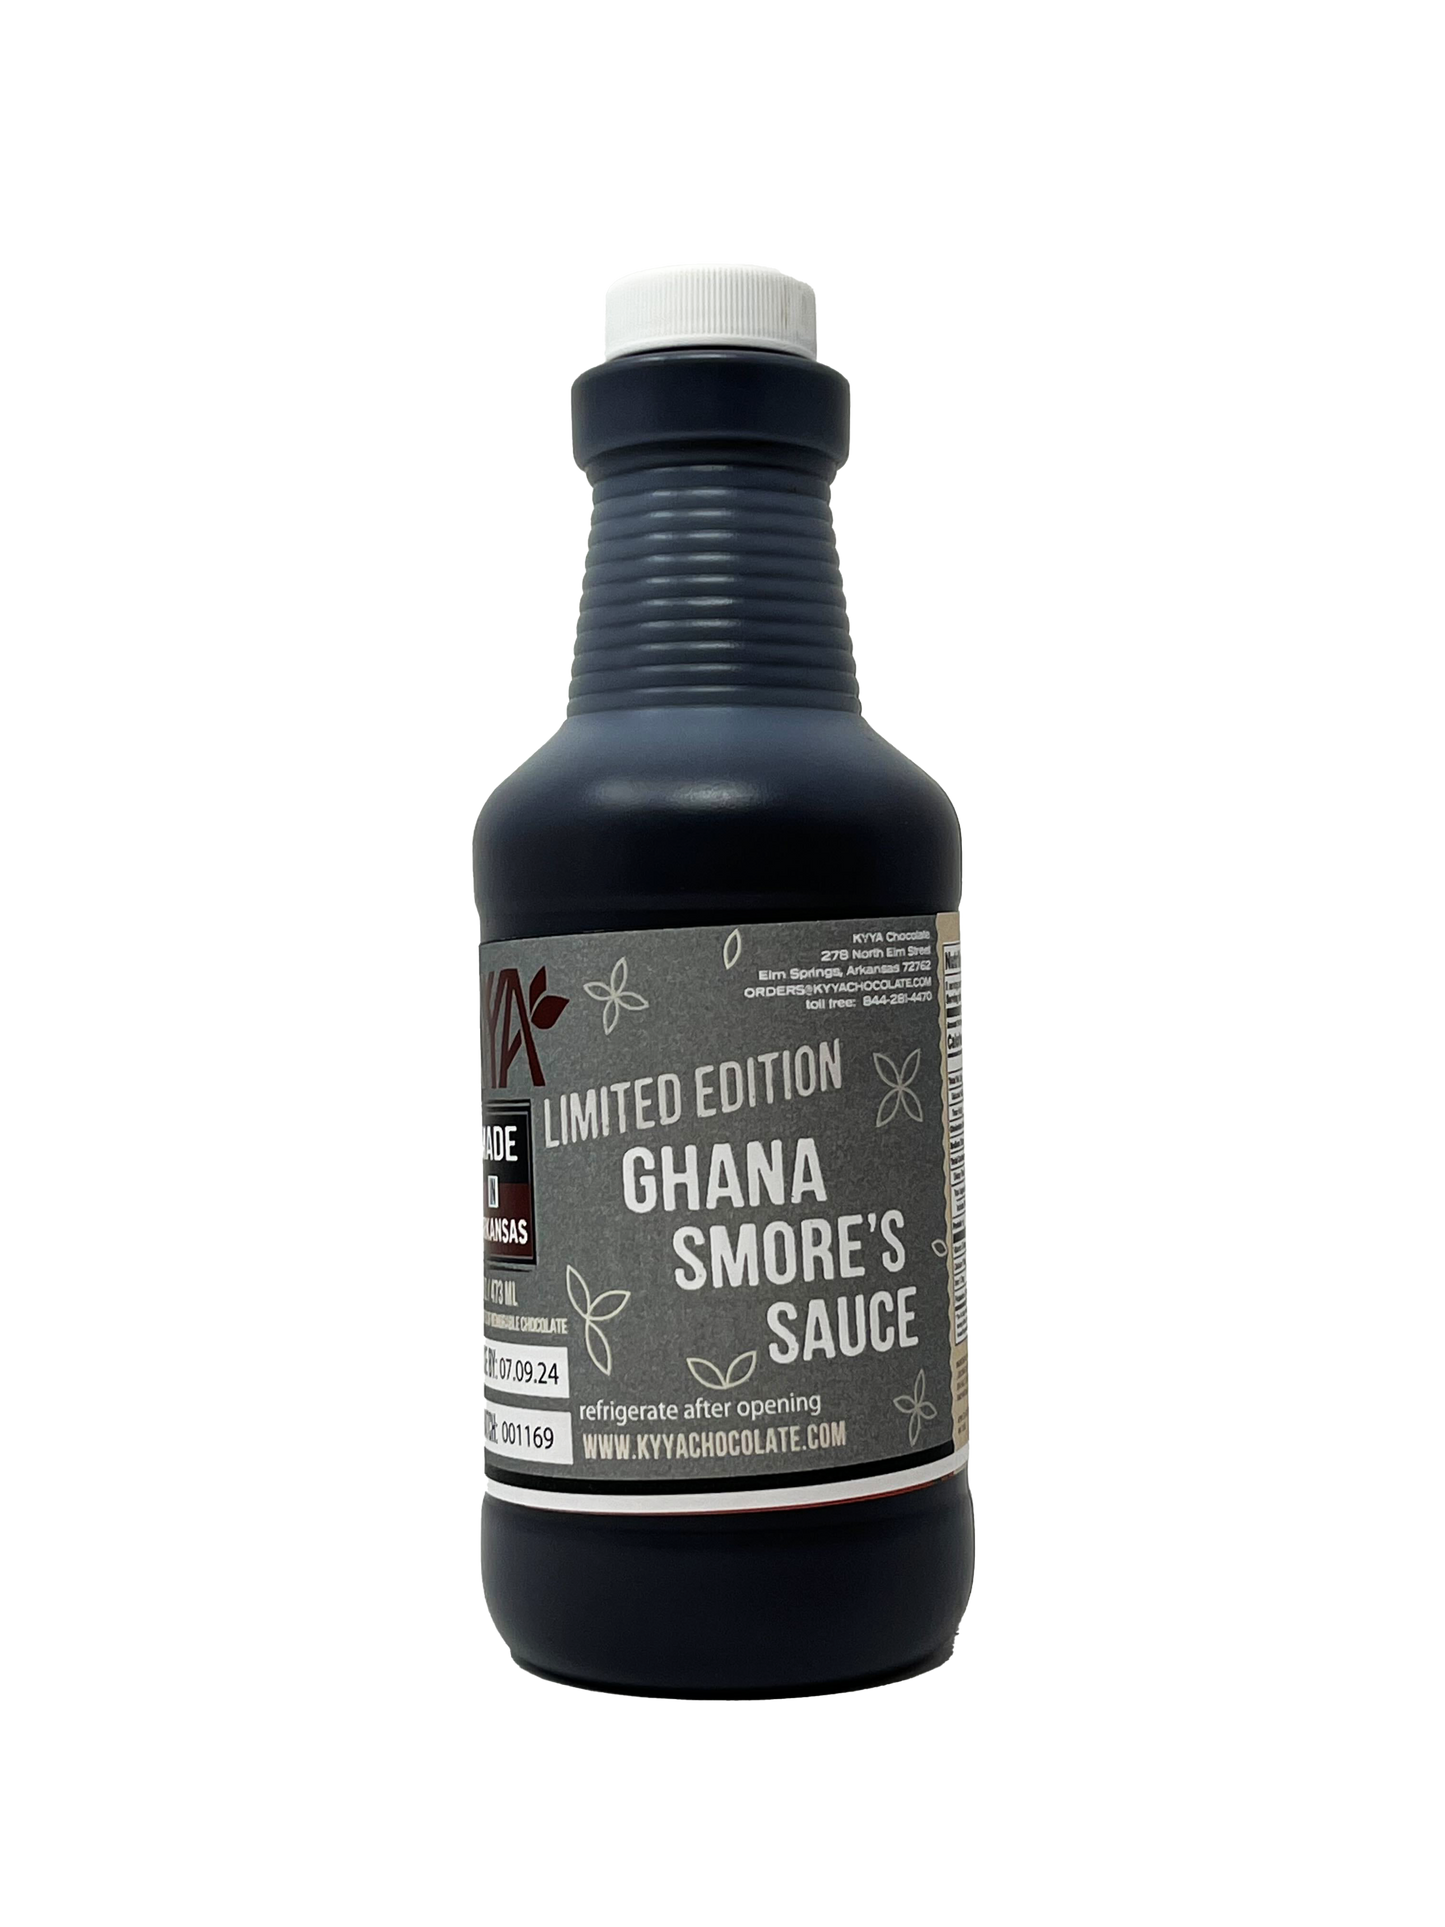 Ghana Smore's Sauce- Limited Edition